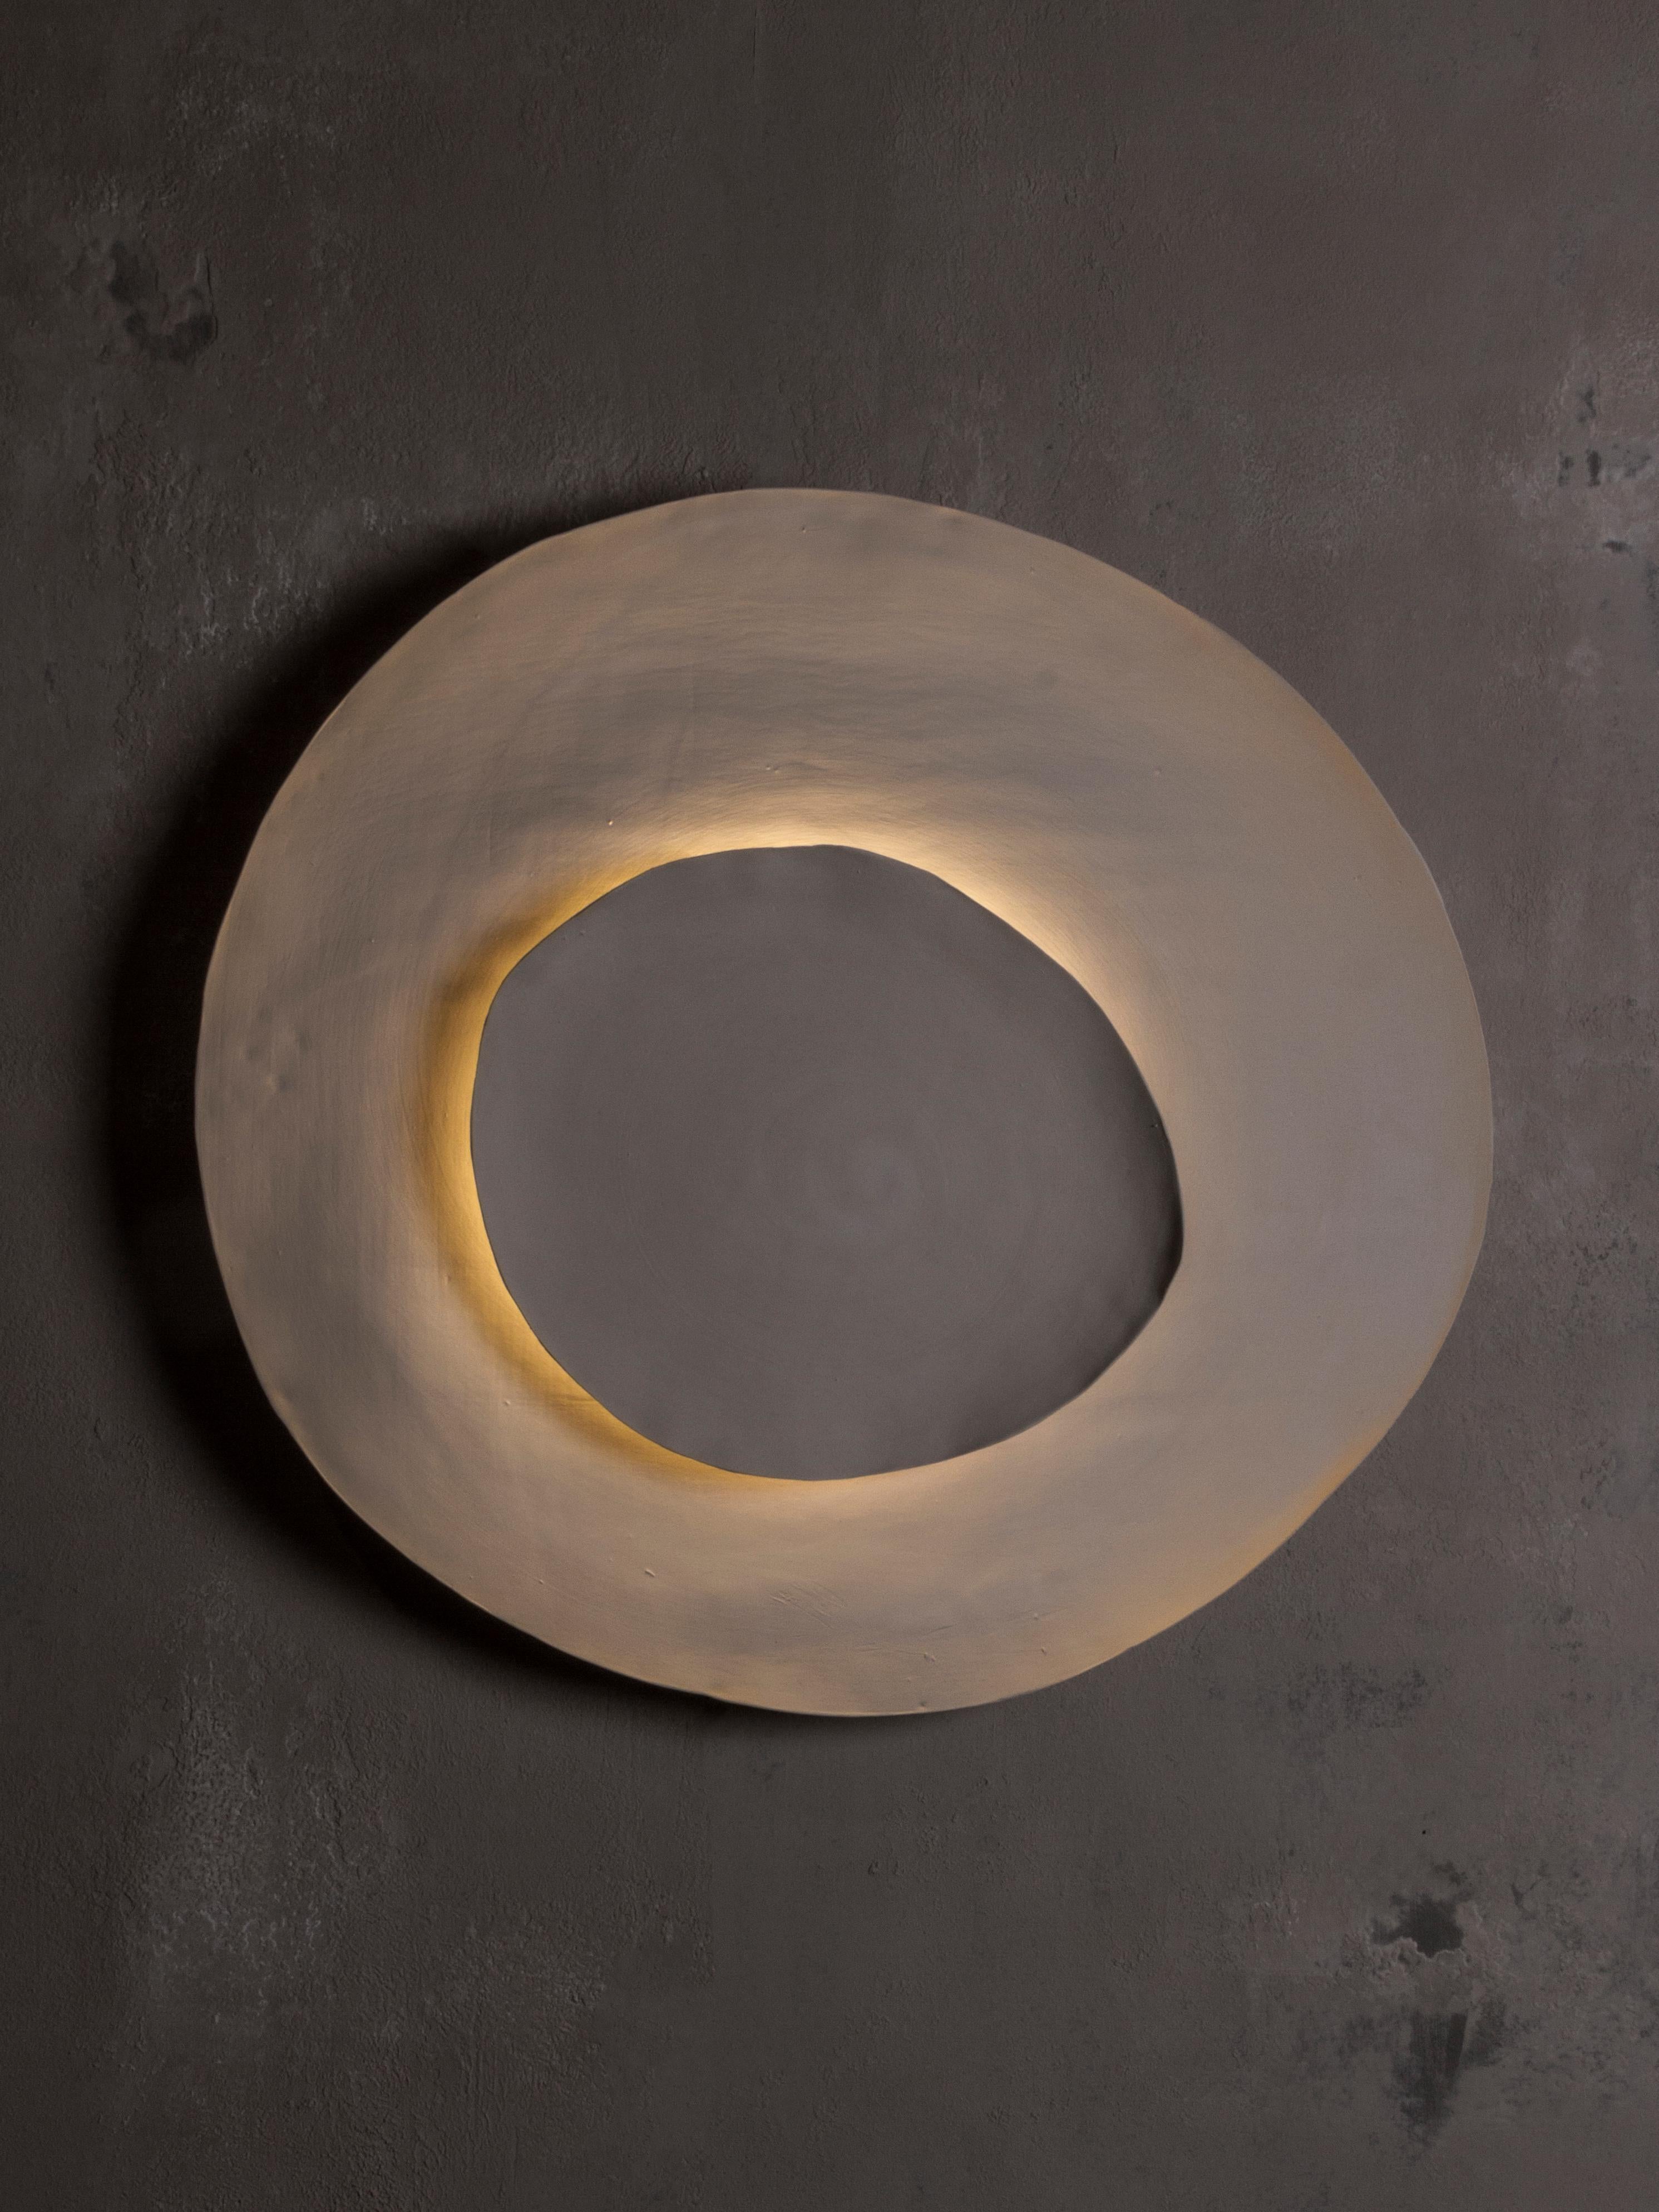 Bone #13 wall light by Margaux Leycuras
One of a Kind, Signed and numbered
Dimensions: D 6 x W 55 x H 50 cm 
Material: Ceramic, sand stoneware tops with a porcelain engobe finish.
The piece is signed, numbered and delivered with a certificate of